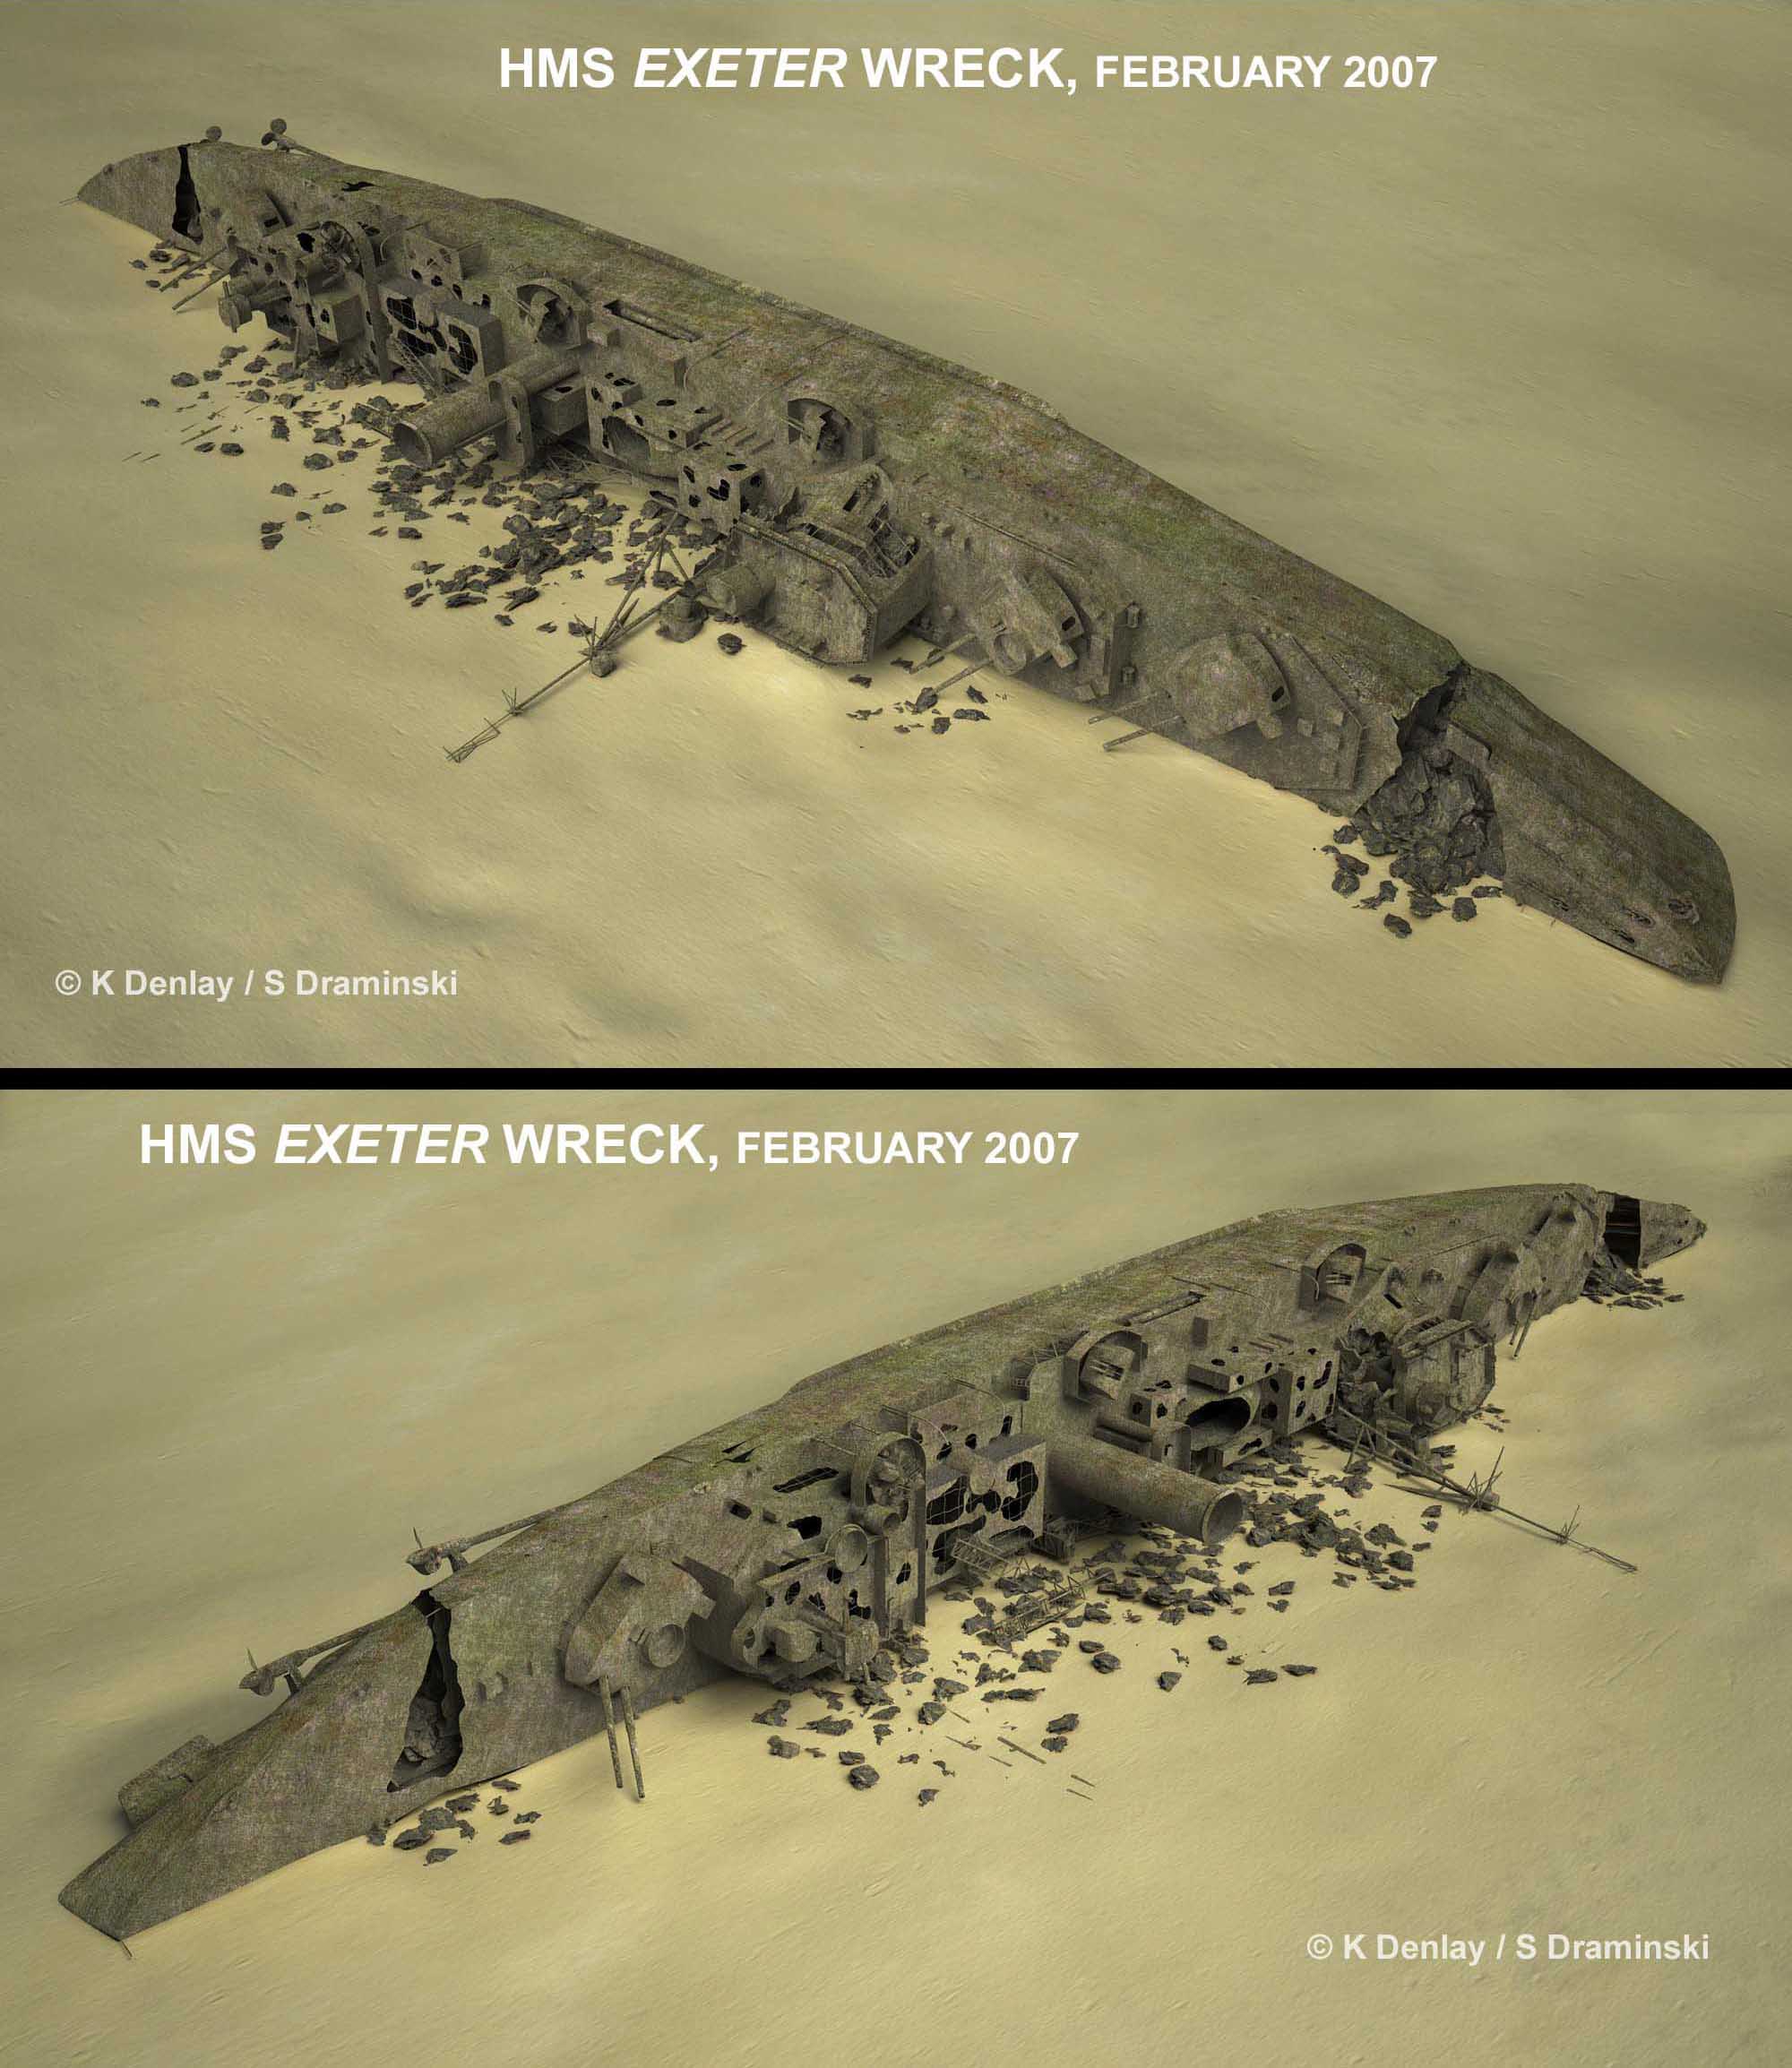 The wreck shown from the bow and the stern, and while the damage to the bow is definitely from a torpedo hit, the crack across aft is definitely not; it is simply from ‘gravitational effects’ as describe in the survey report.